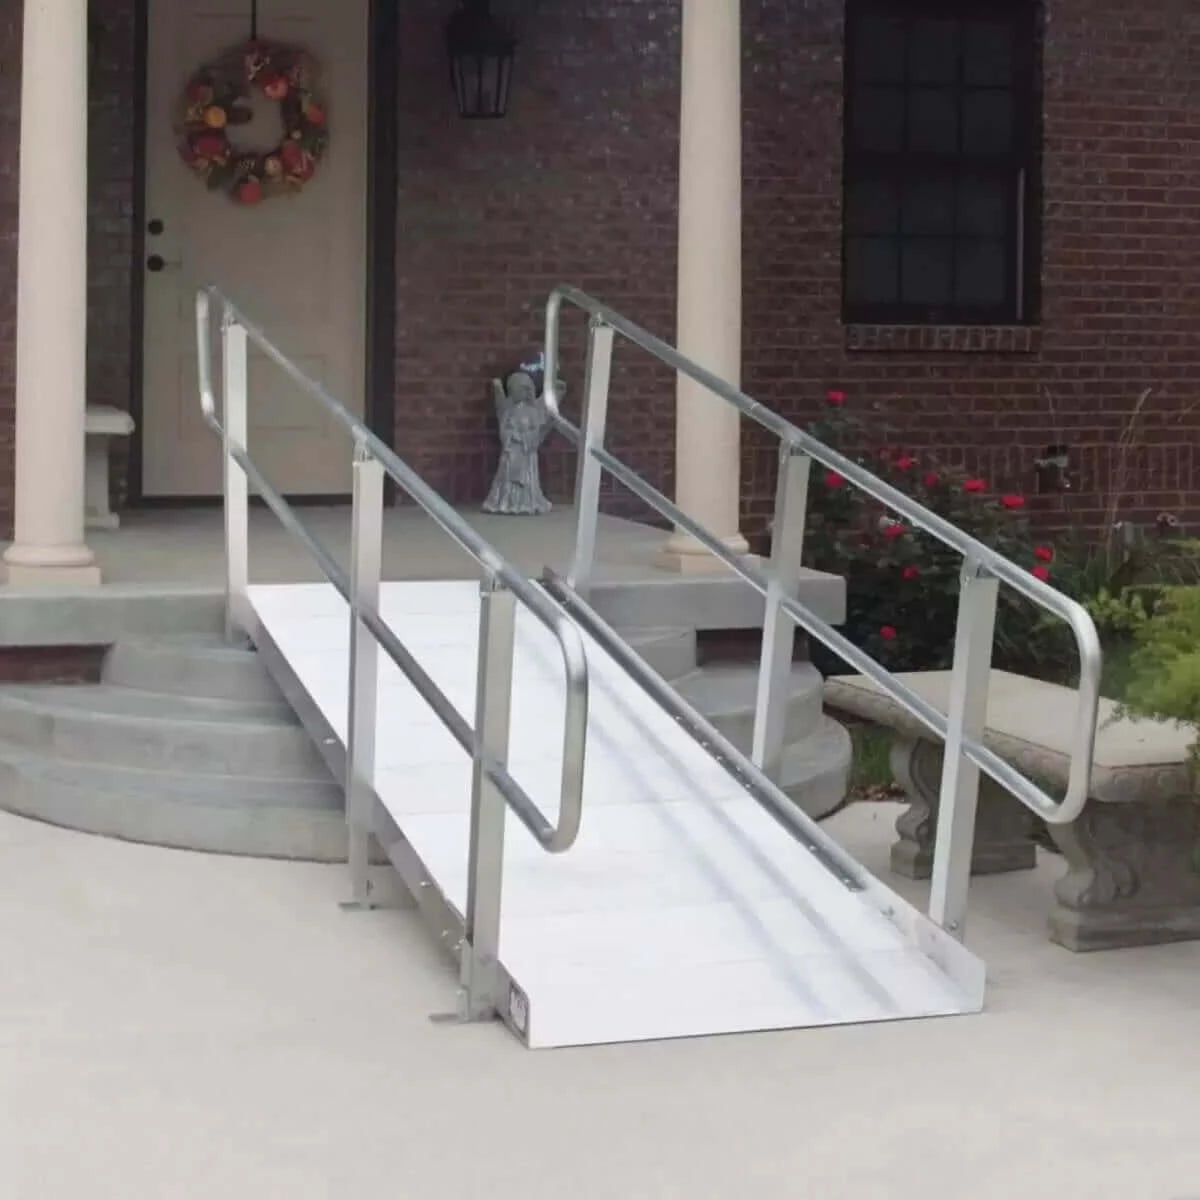 pvi on trac wheelchair ramp on steps reliable ramps